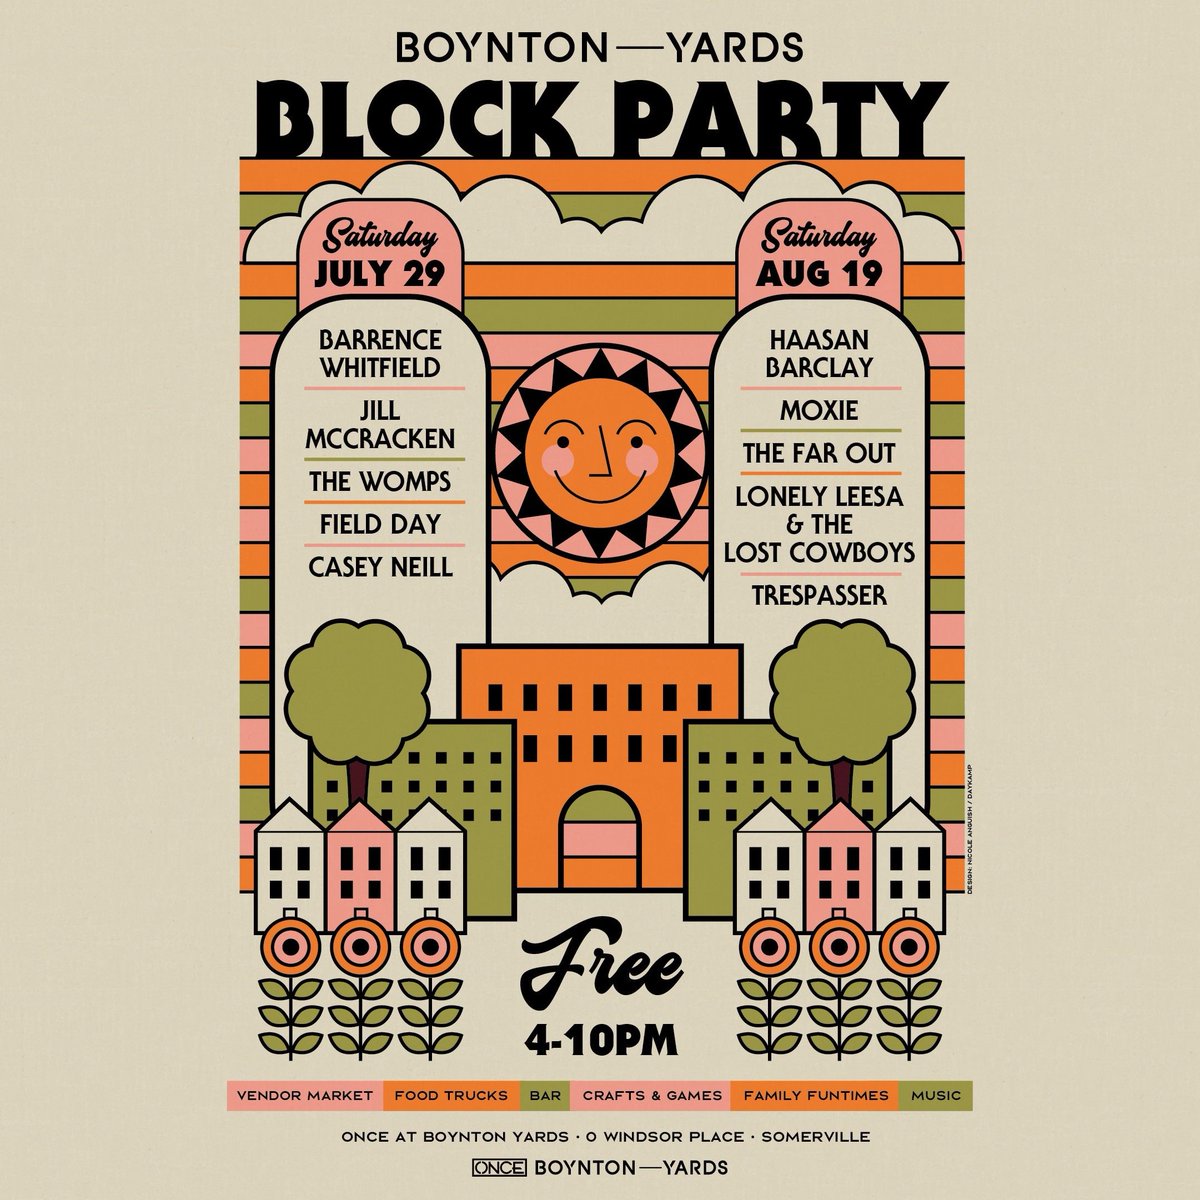 Our first #boyntonyards Block Party is 3 weeks away – Sat, July 29! Music, vendors, food, drink and more. On the stage…@barrencewhitfield_savages, @jillmccracken, @thewompsrock, @fielddaymusic, @casey_neill, @haasanbarclay, @moxietheband, @thefaroutband